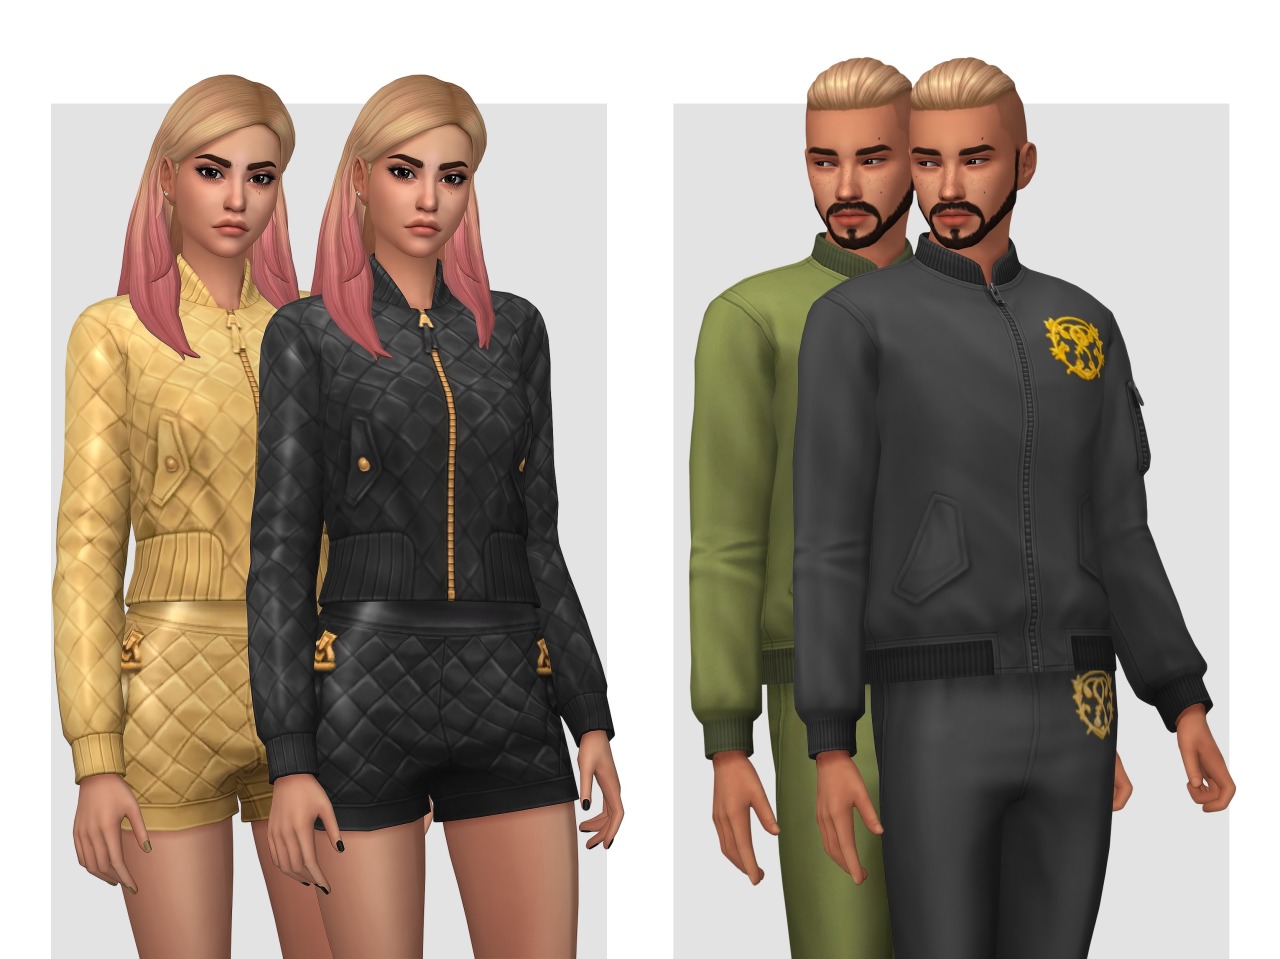 The Sims 2 Moschino Stuff Pack - Designer Outfits & Accessories!